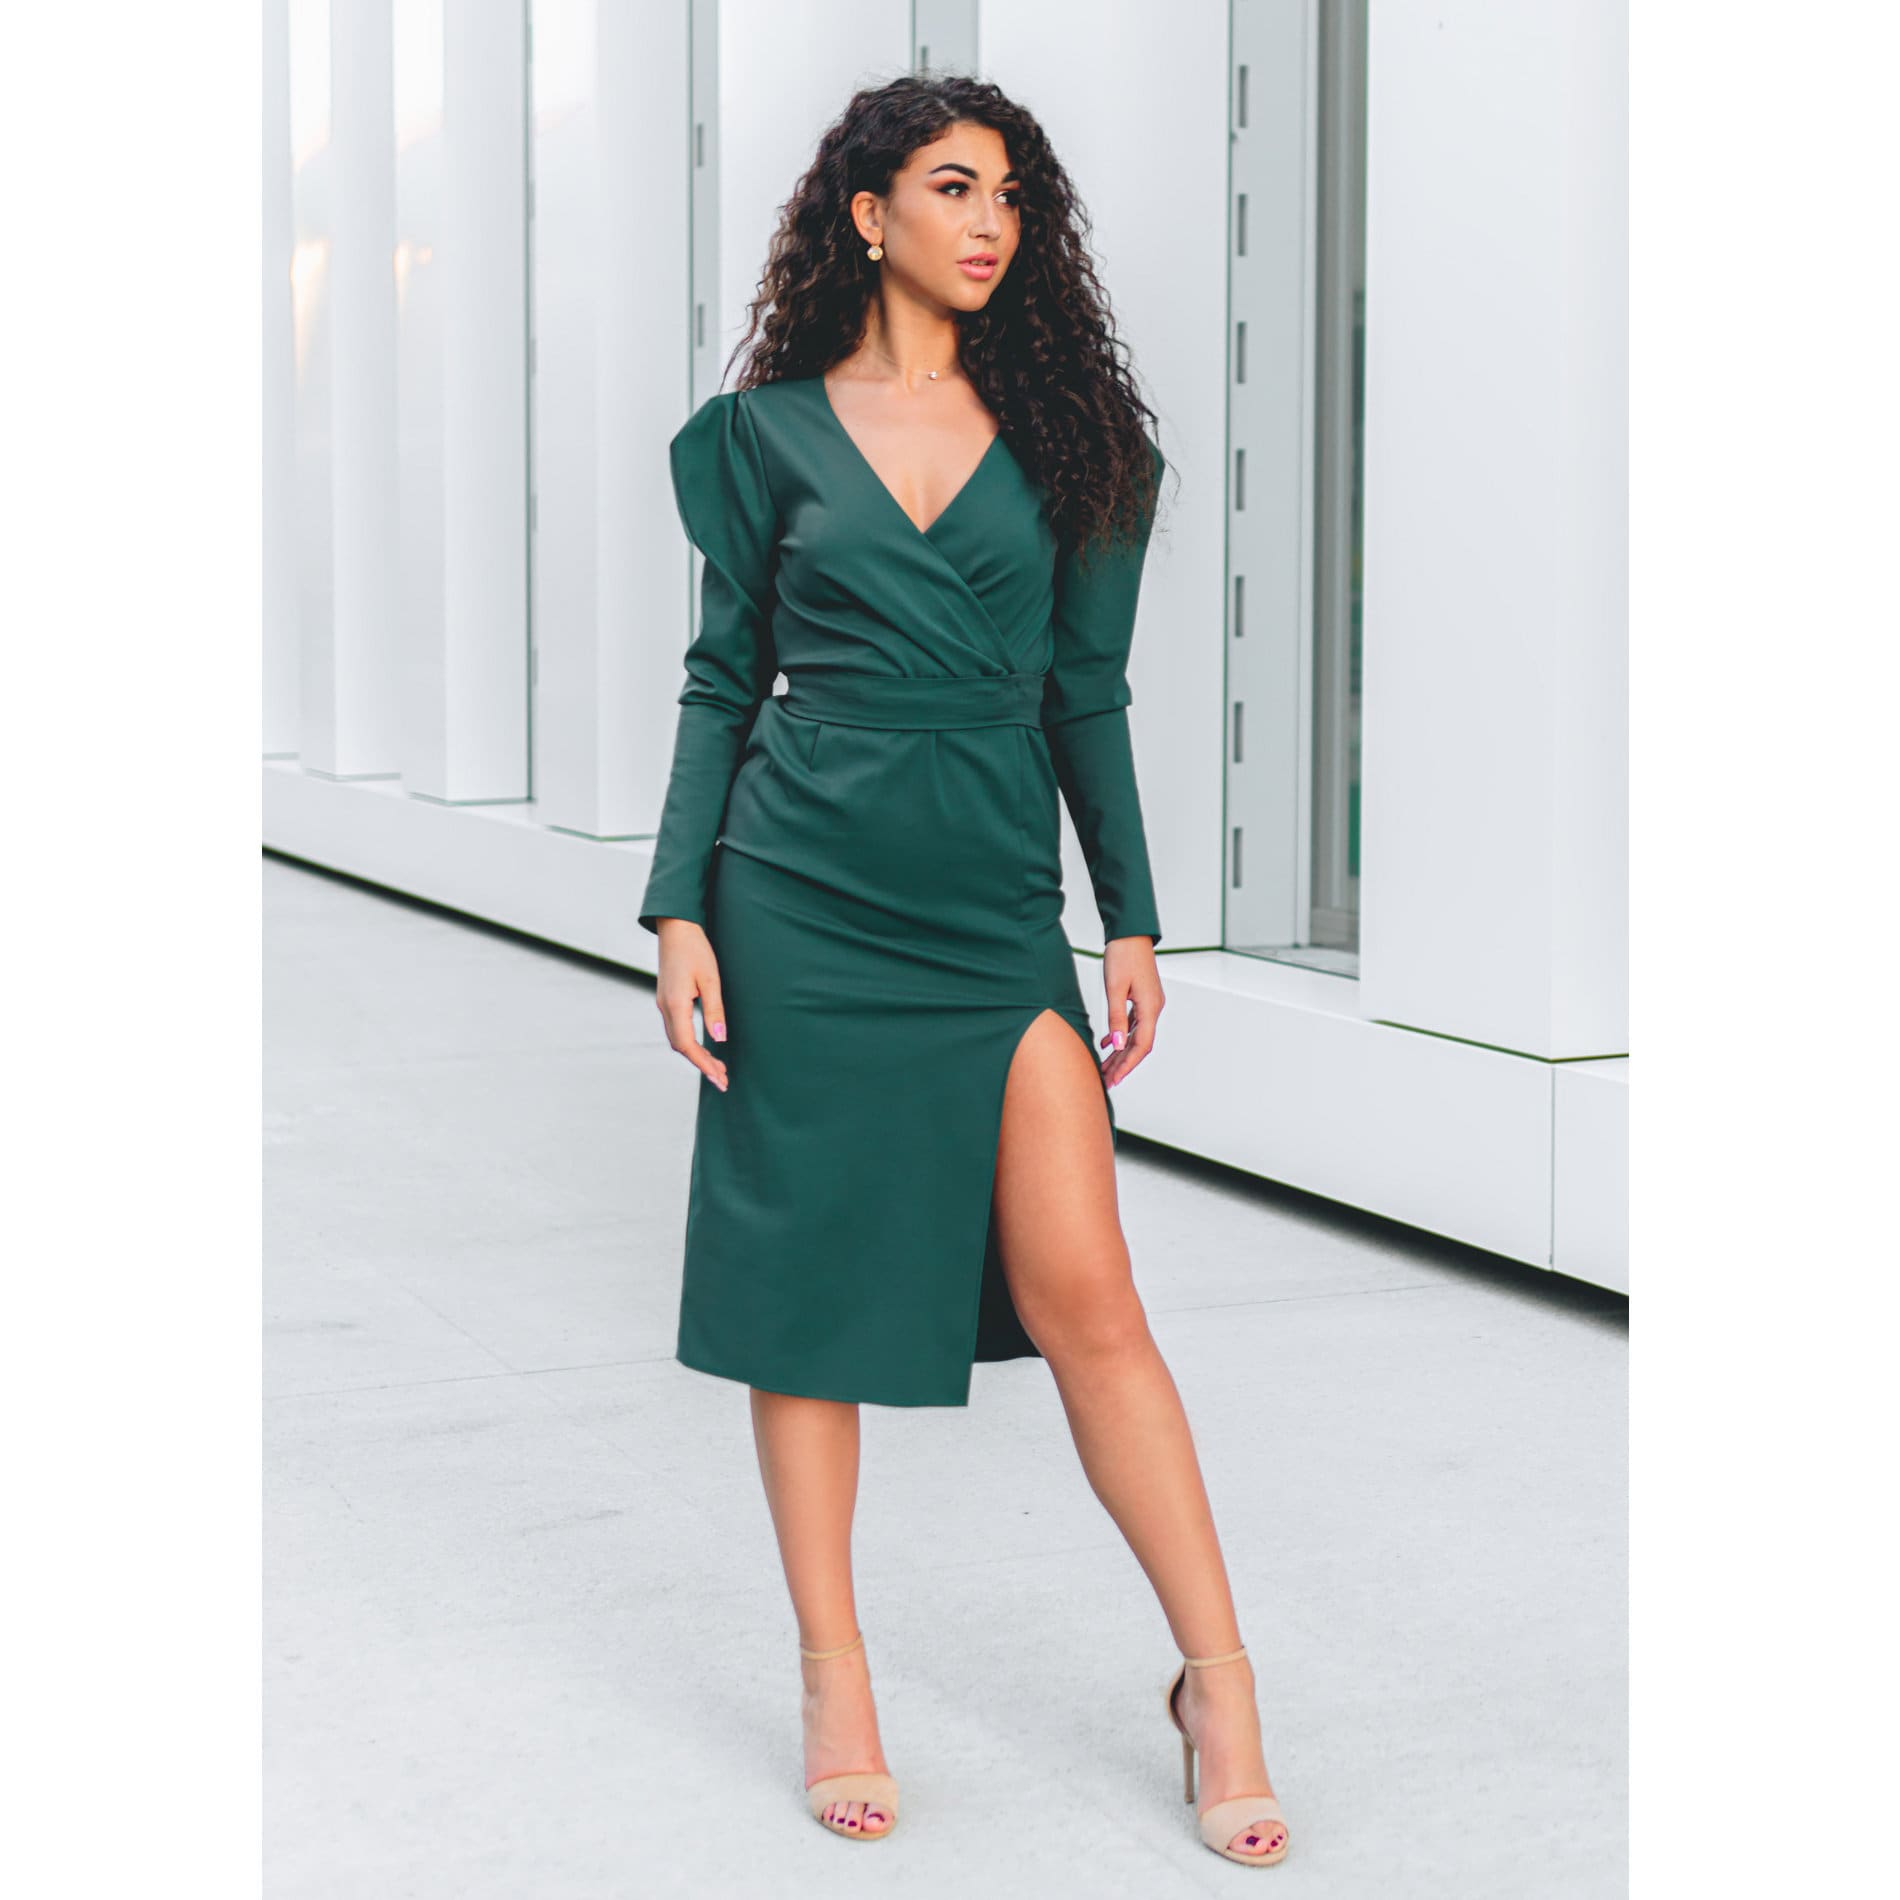 Green Pencil Dress V Neck Puff Shoulder Cotton Midi Dress With Slit and ...